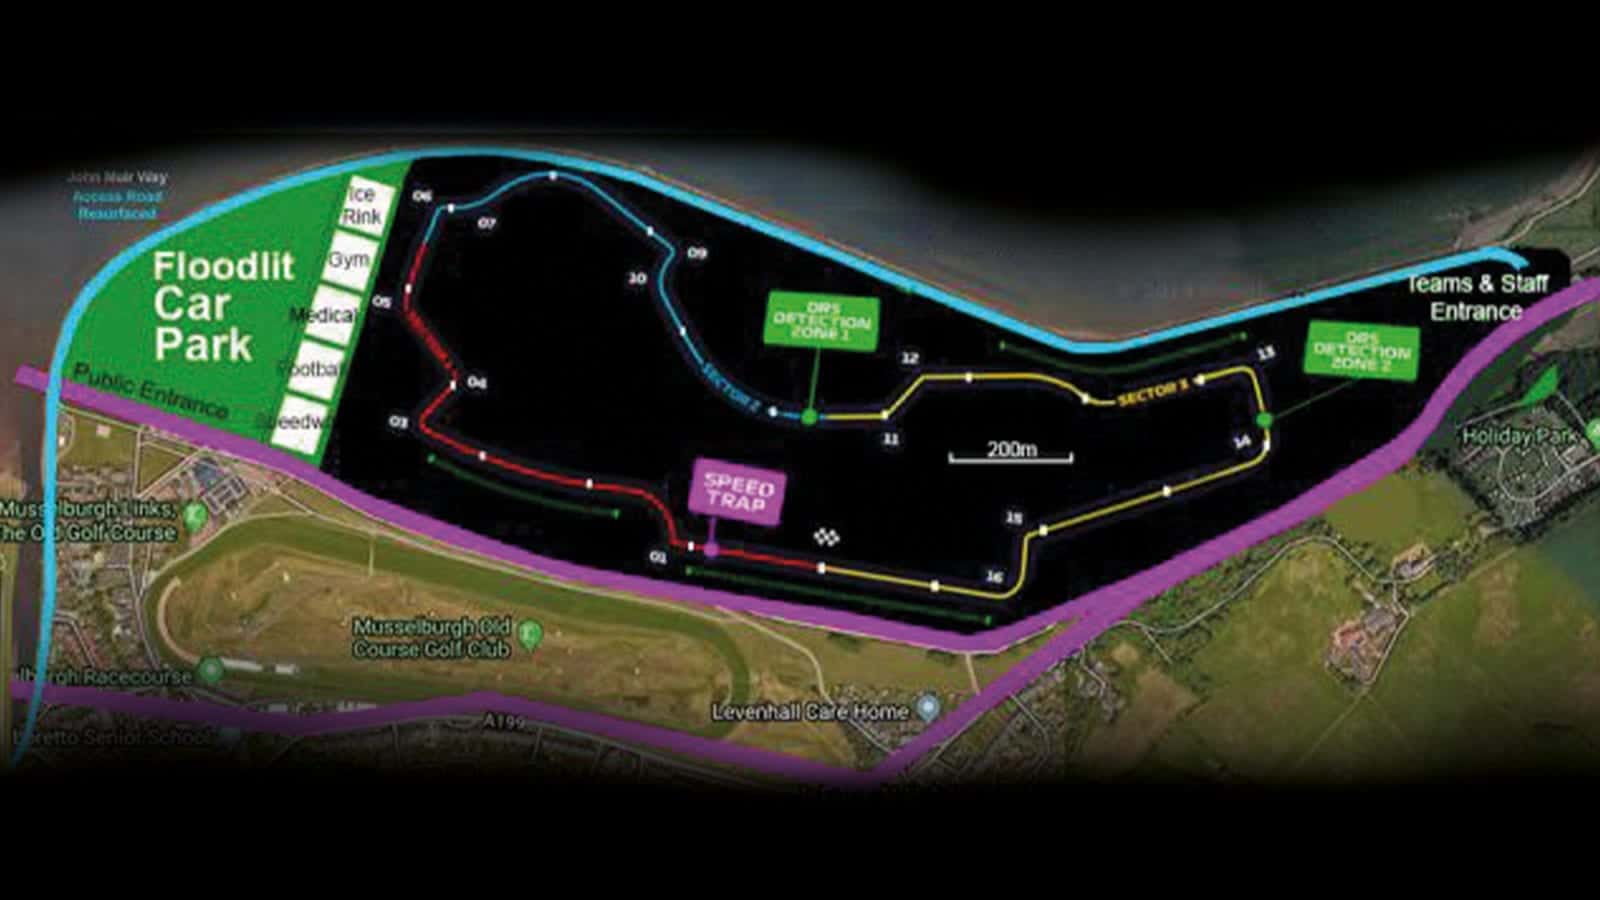 Proposed Musselburgh Lagoons race track